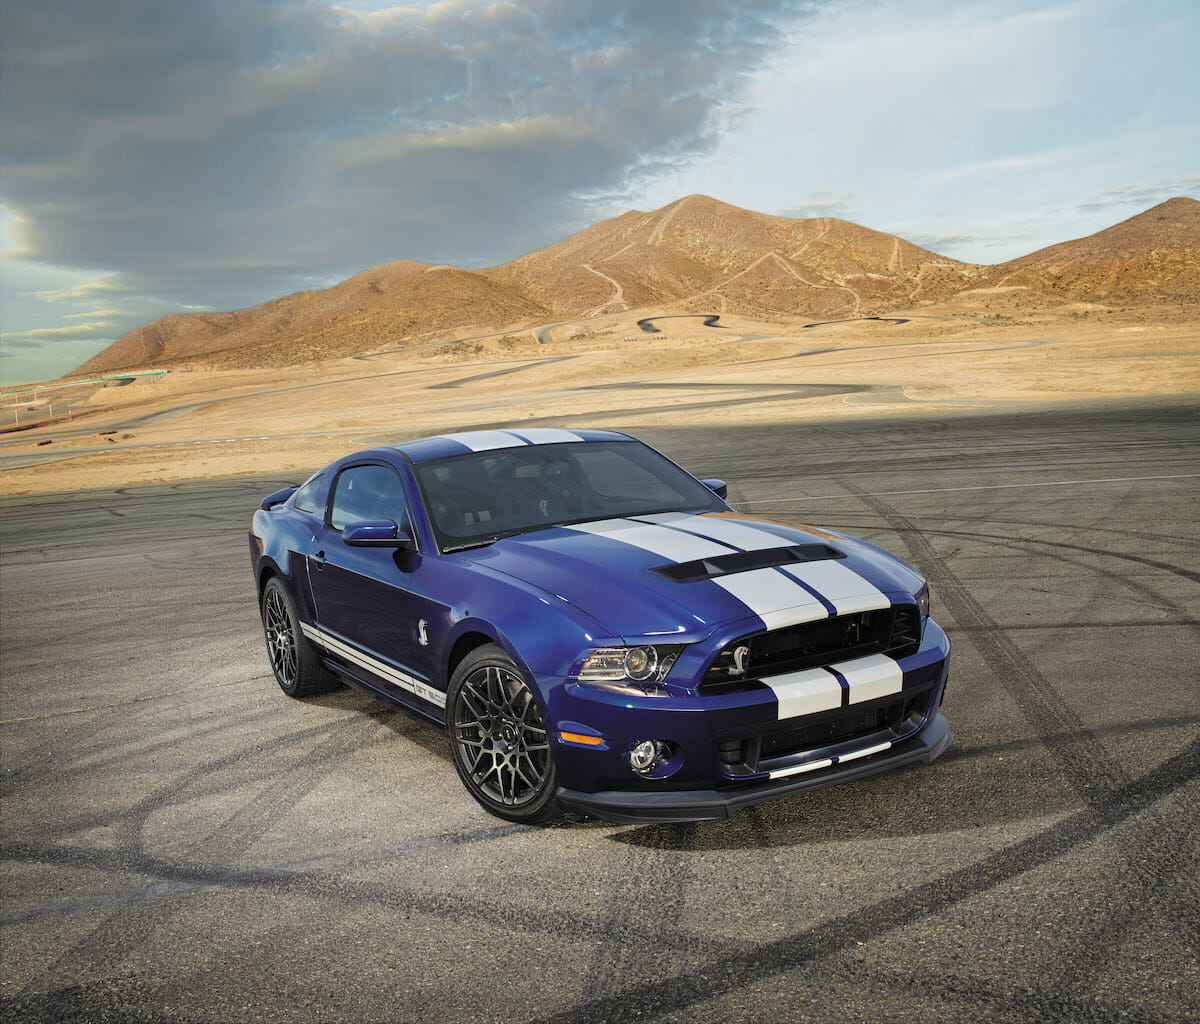 2014 Ford Mustang Shelby GT500 - Photo by Ford